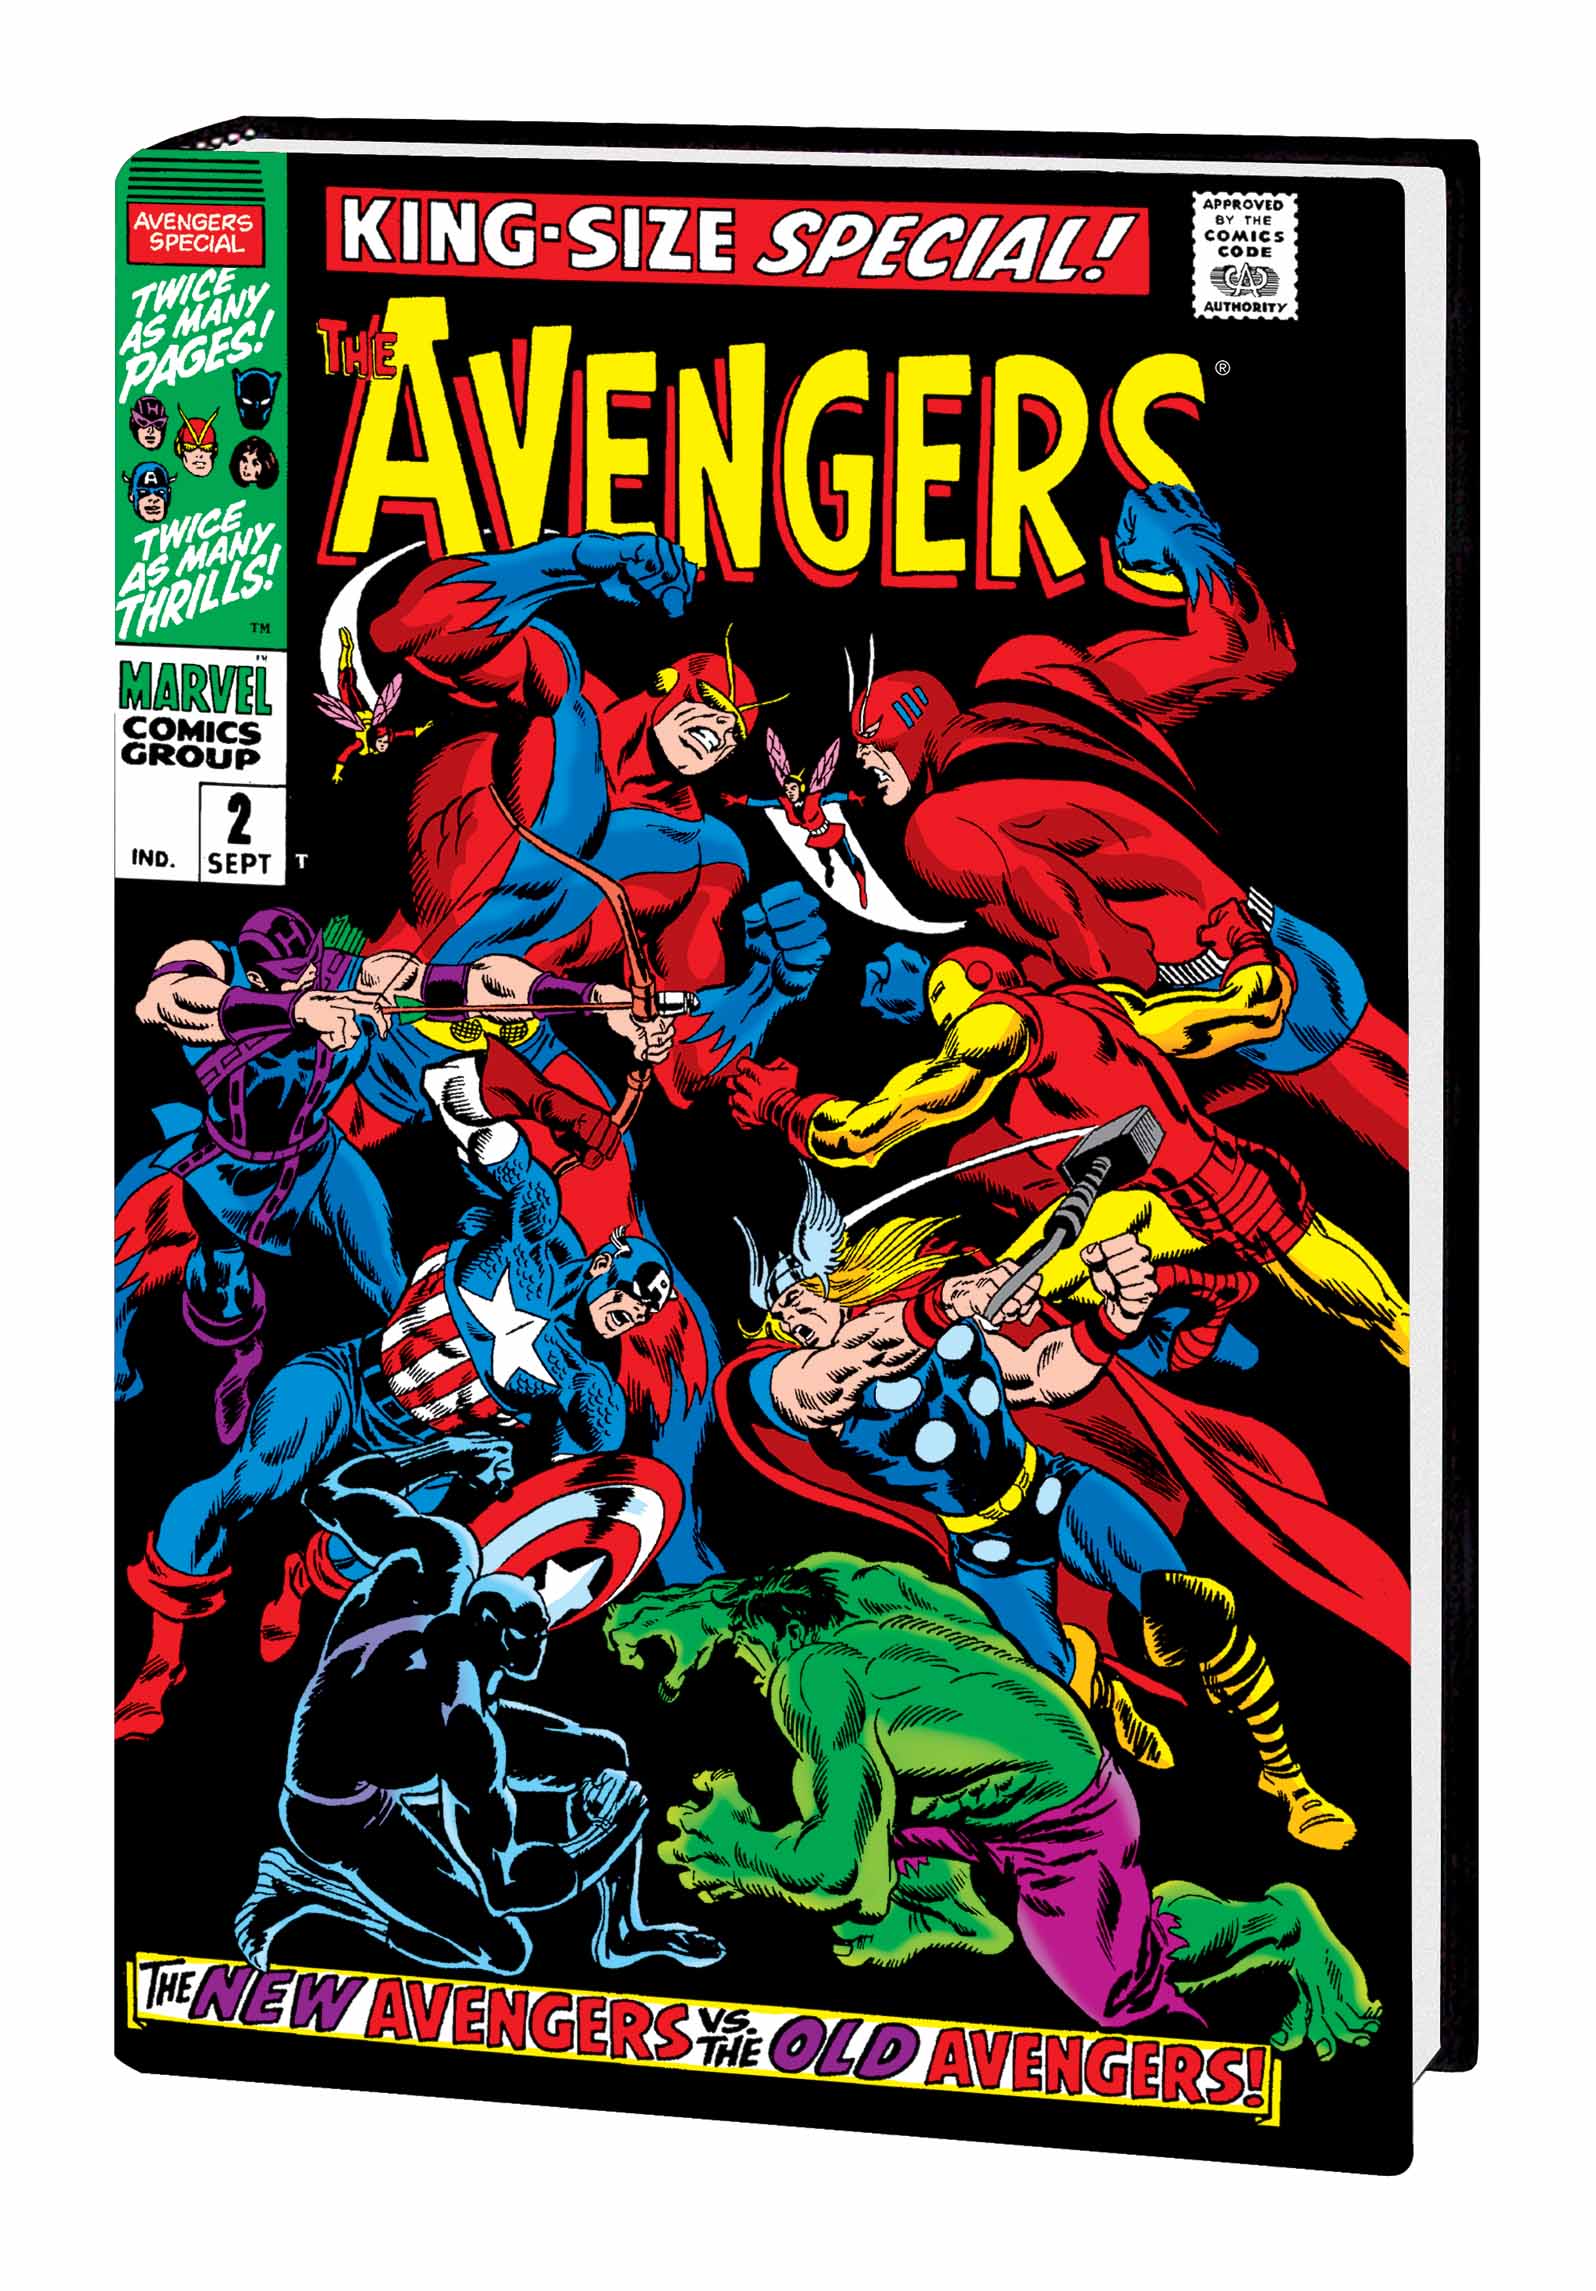 THE AVENGERS OMNIBUS VOL. 2 HC BUSCEMA COVER (DM ONLY) (Hardcover)